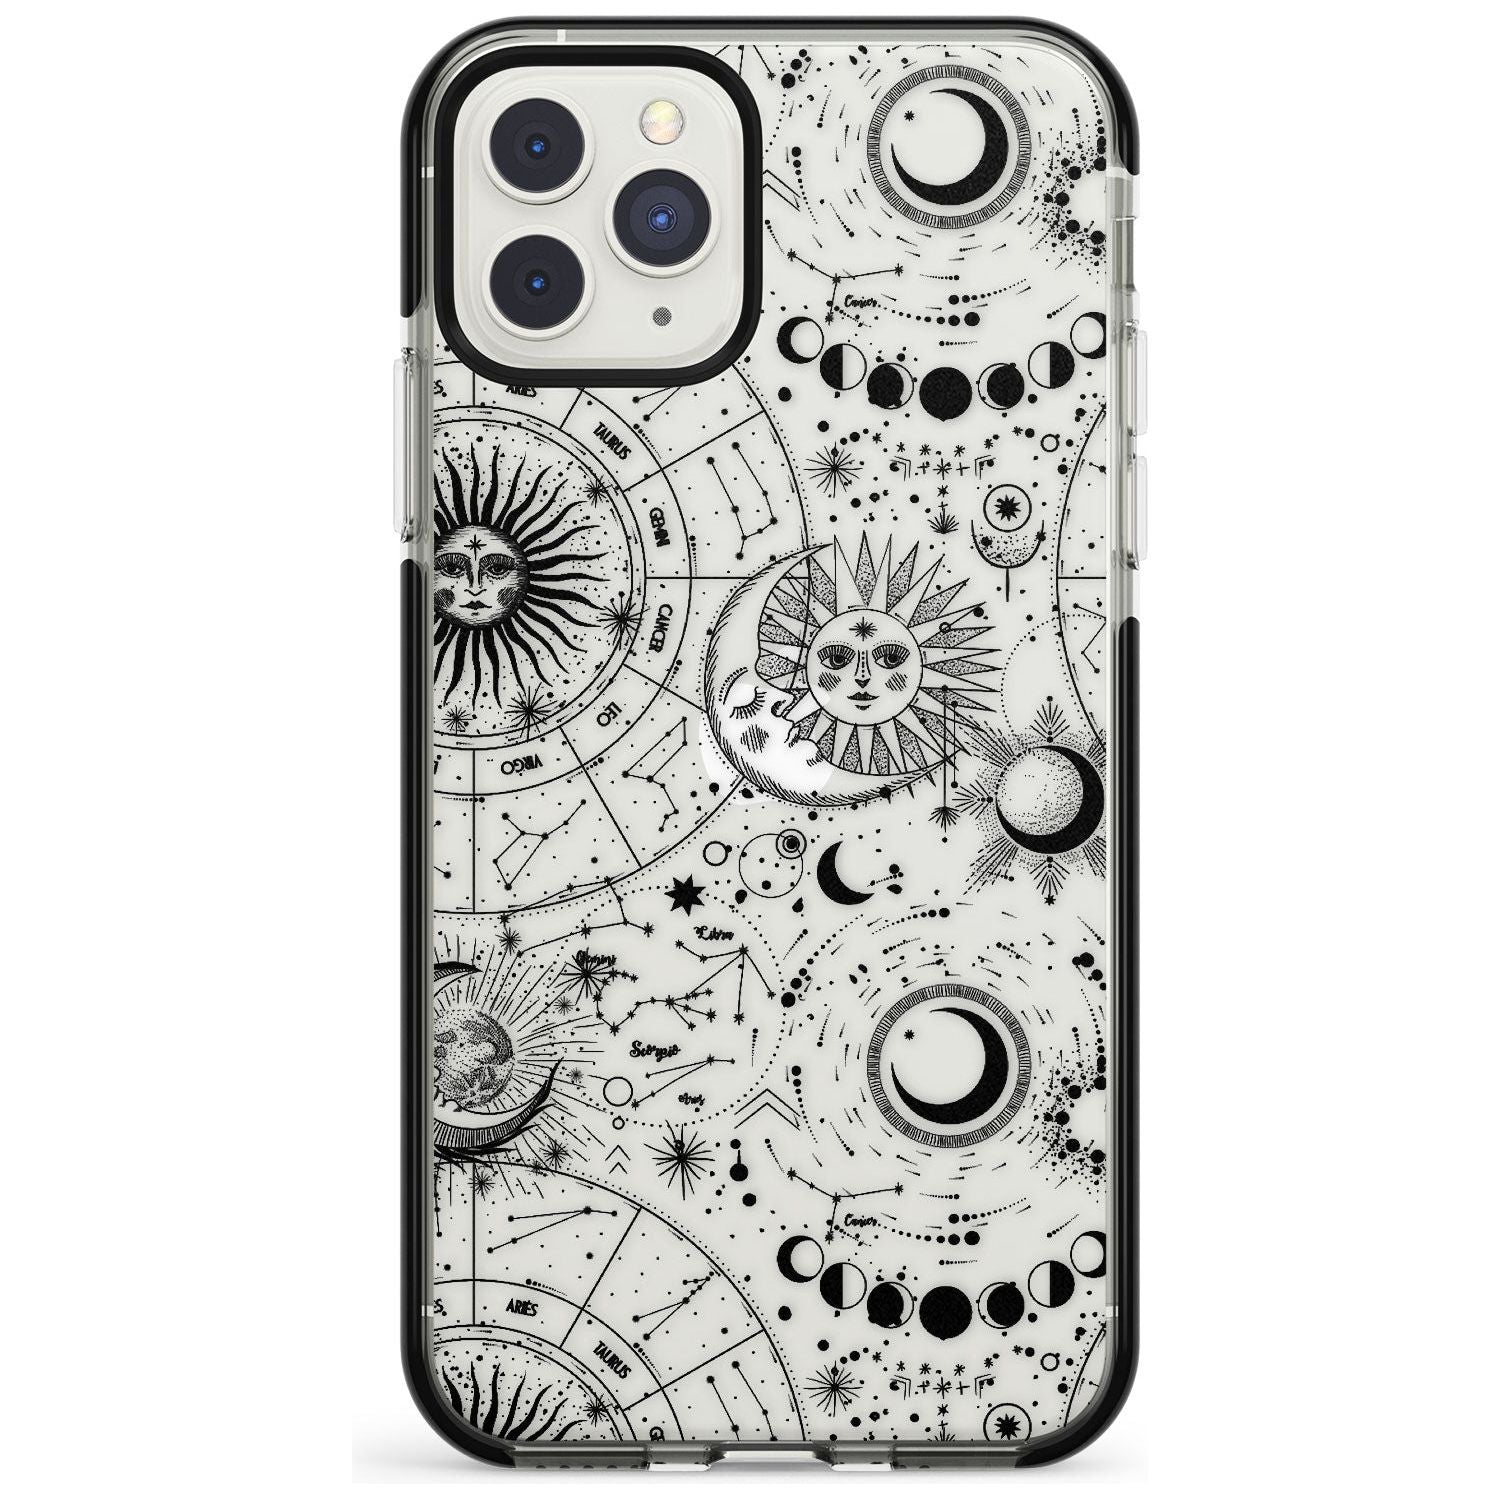 Suns, Moons, Zodiac Signs Astrological Black Impact Phone Case for iPhone 11 Pro Max